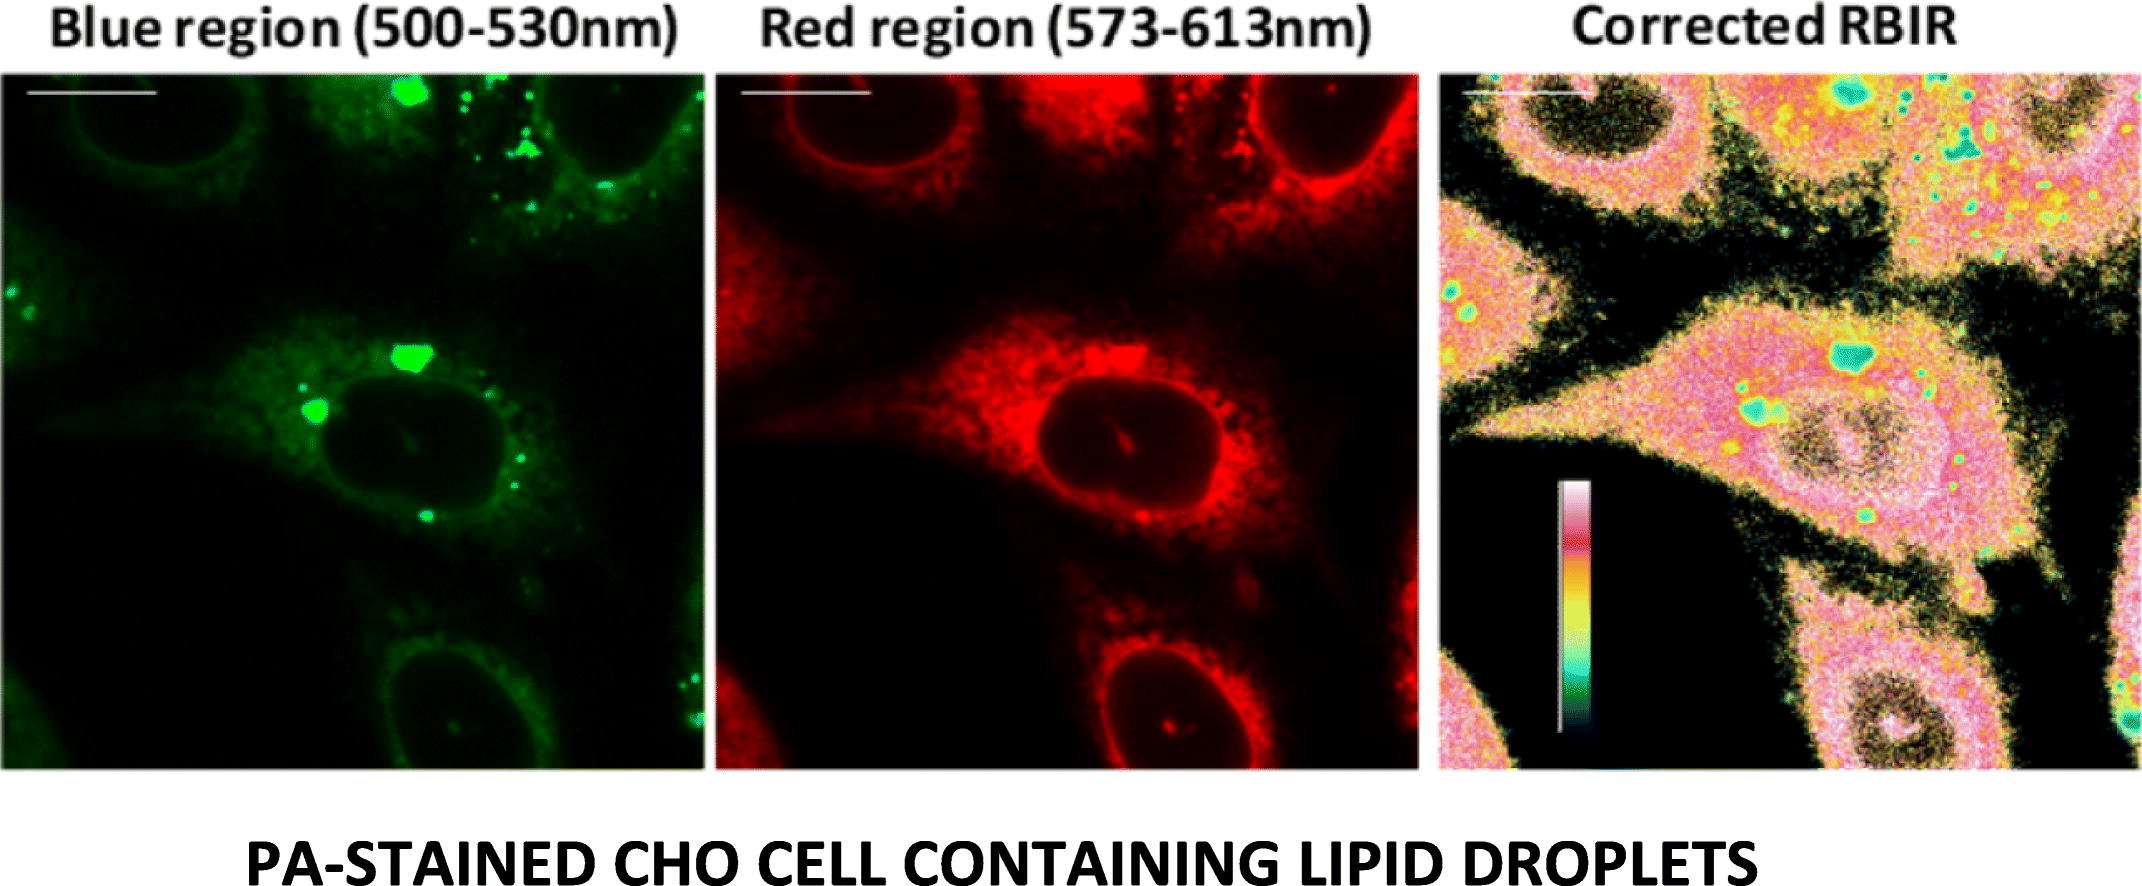 K. Phase-selective staining of model and cell membranes, lipid droplets and lipoproteins with fluorescent solvatochromic pyrene probes